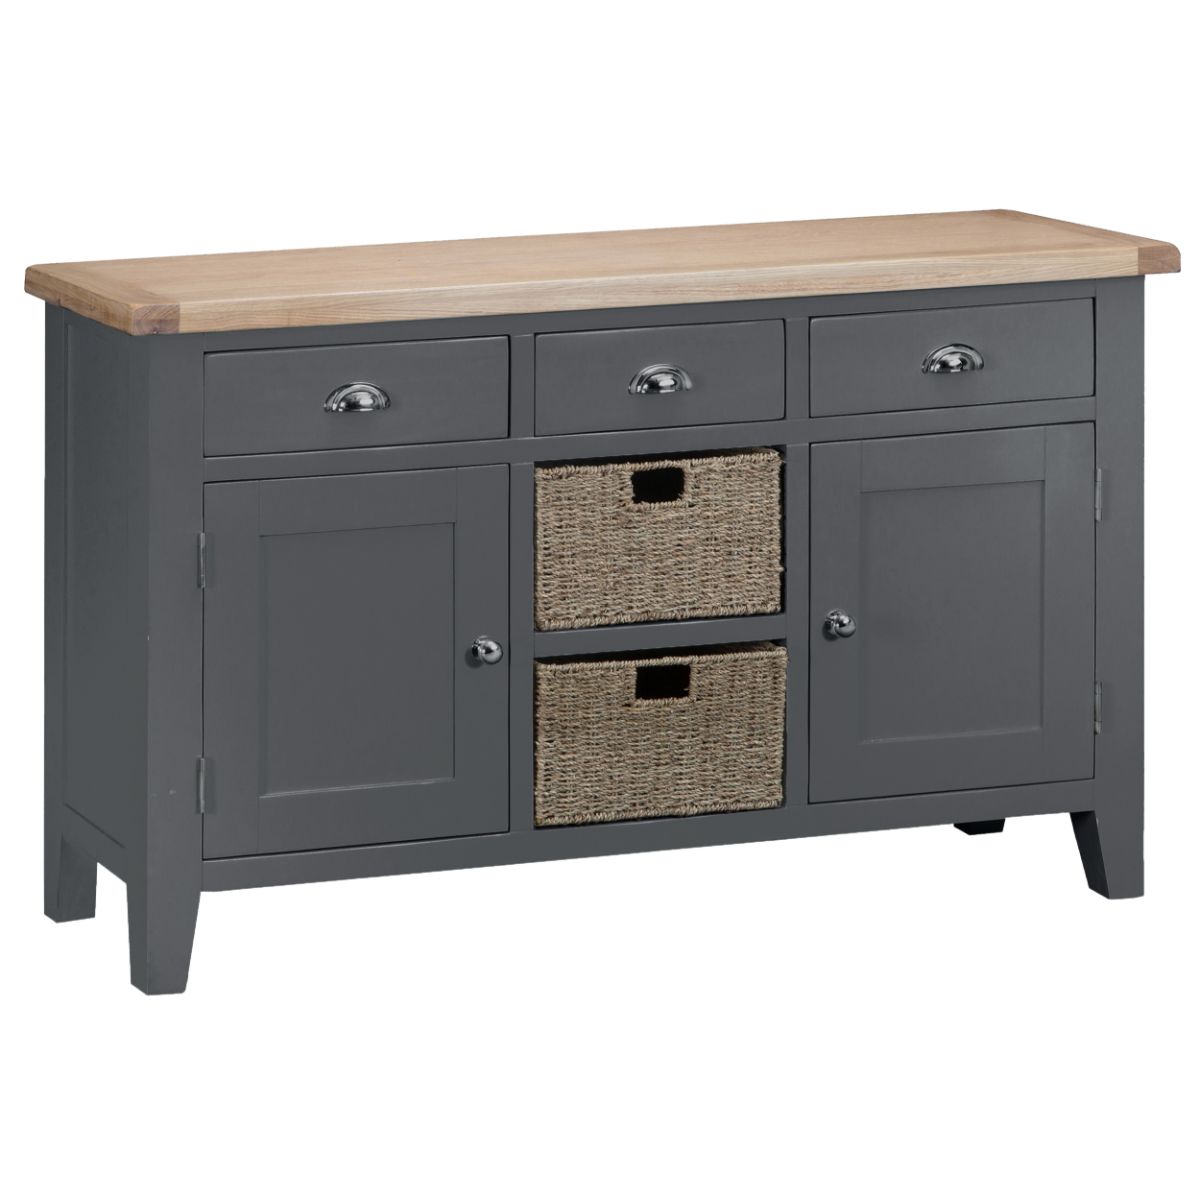 TT Dining-Charcoal Large Sideboard